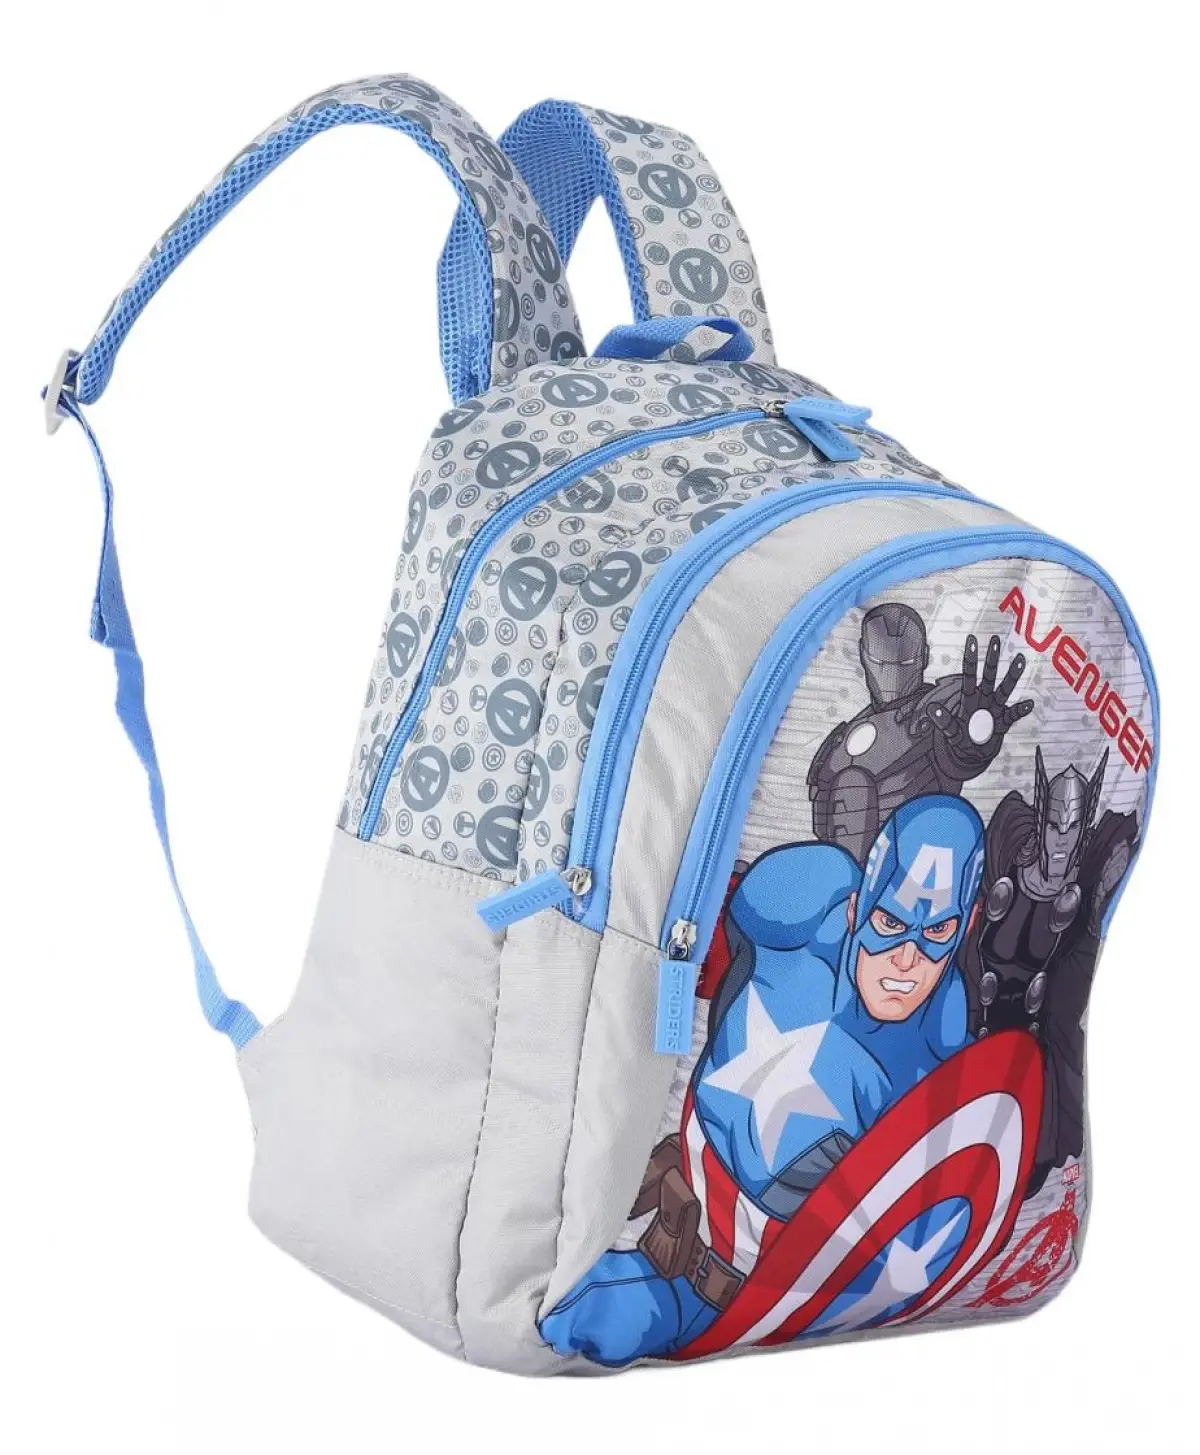 Striders 14 inches Avengers School Bag A Playful Companion for School Days Multicolor For Kids Ages 3Y+